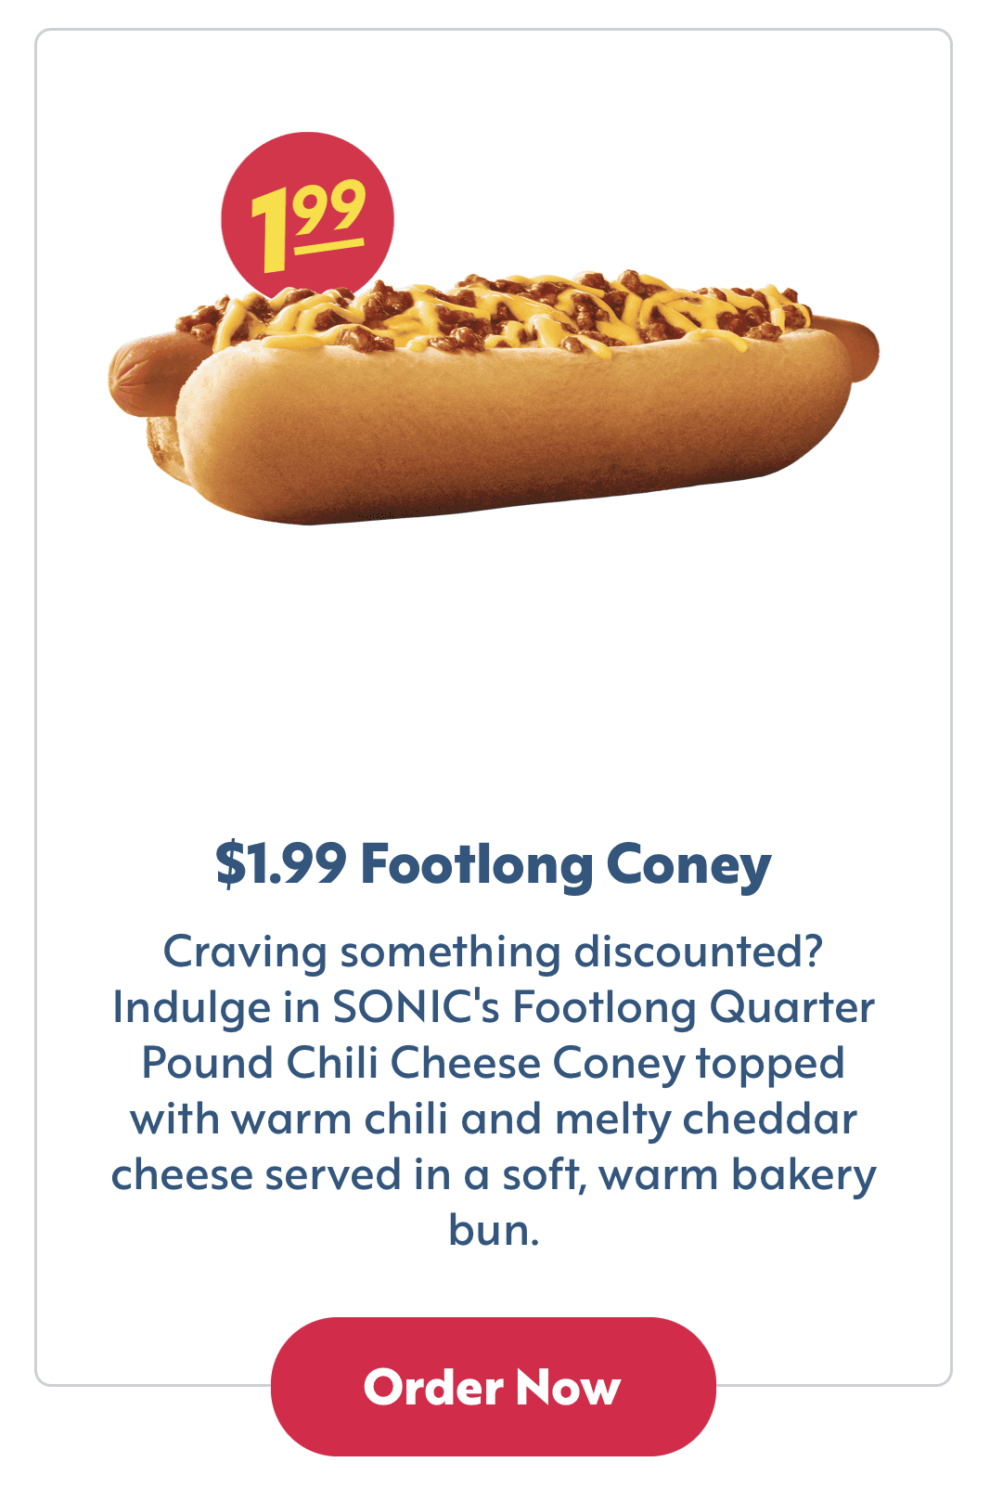 Updated! Sonic Drive-In Offers 2 for $7 Value Menu with Big Savings - Mile  High on the Cheap